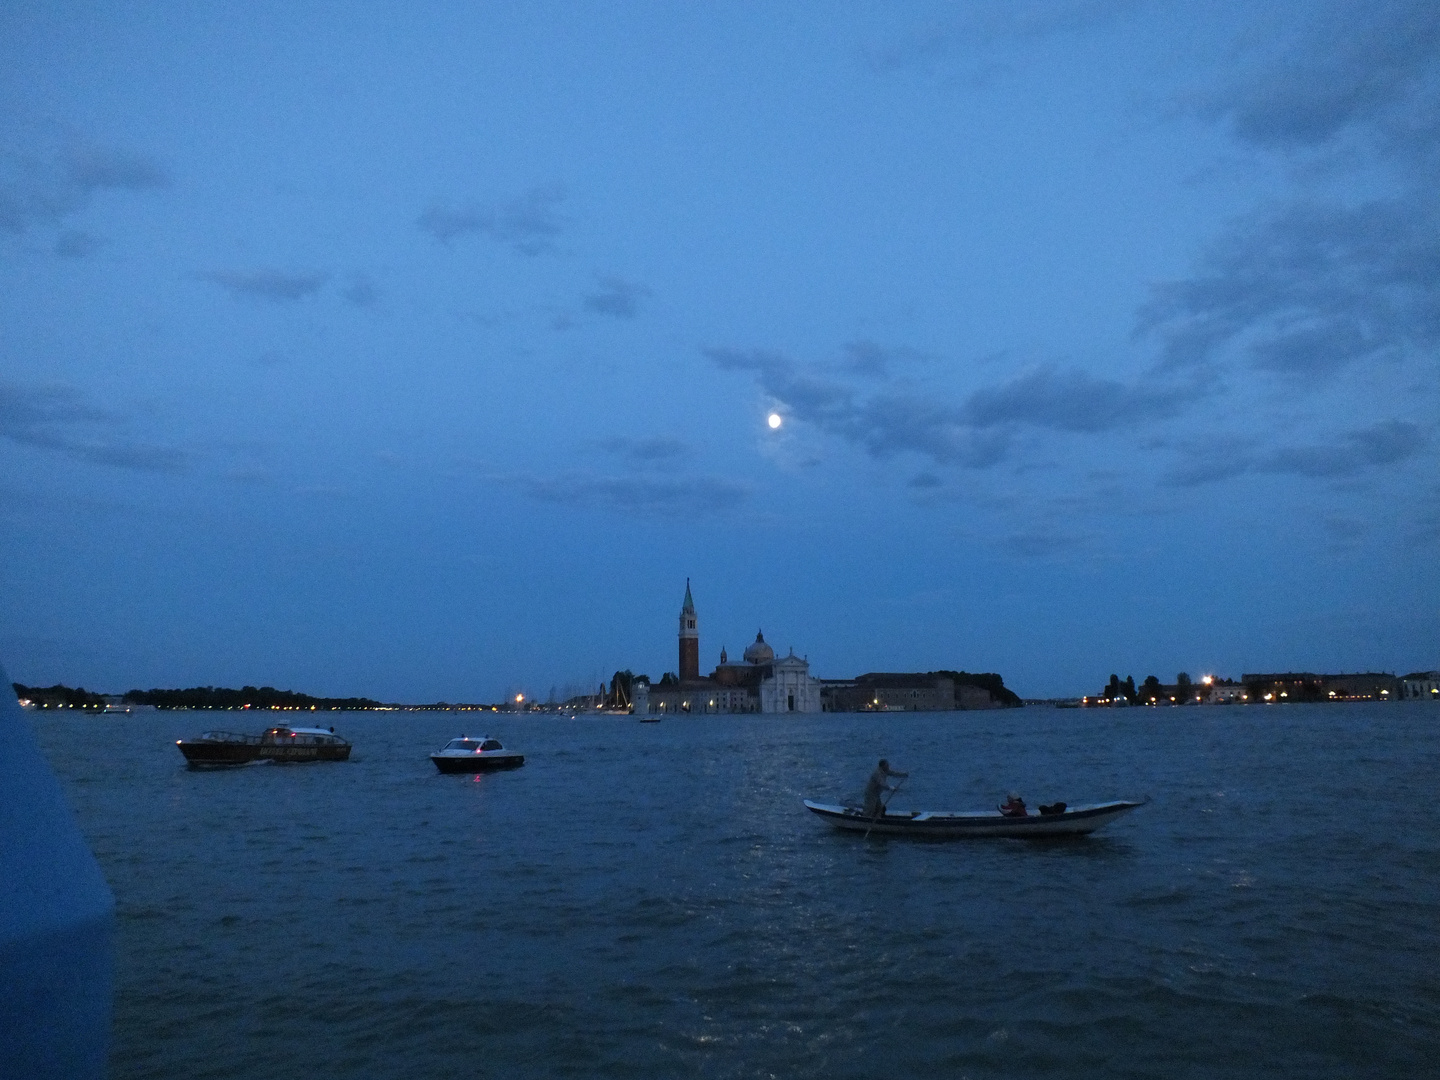 Full moon over the Grand Canal!